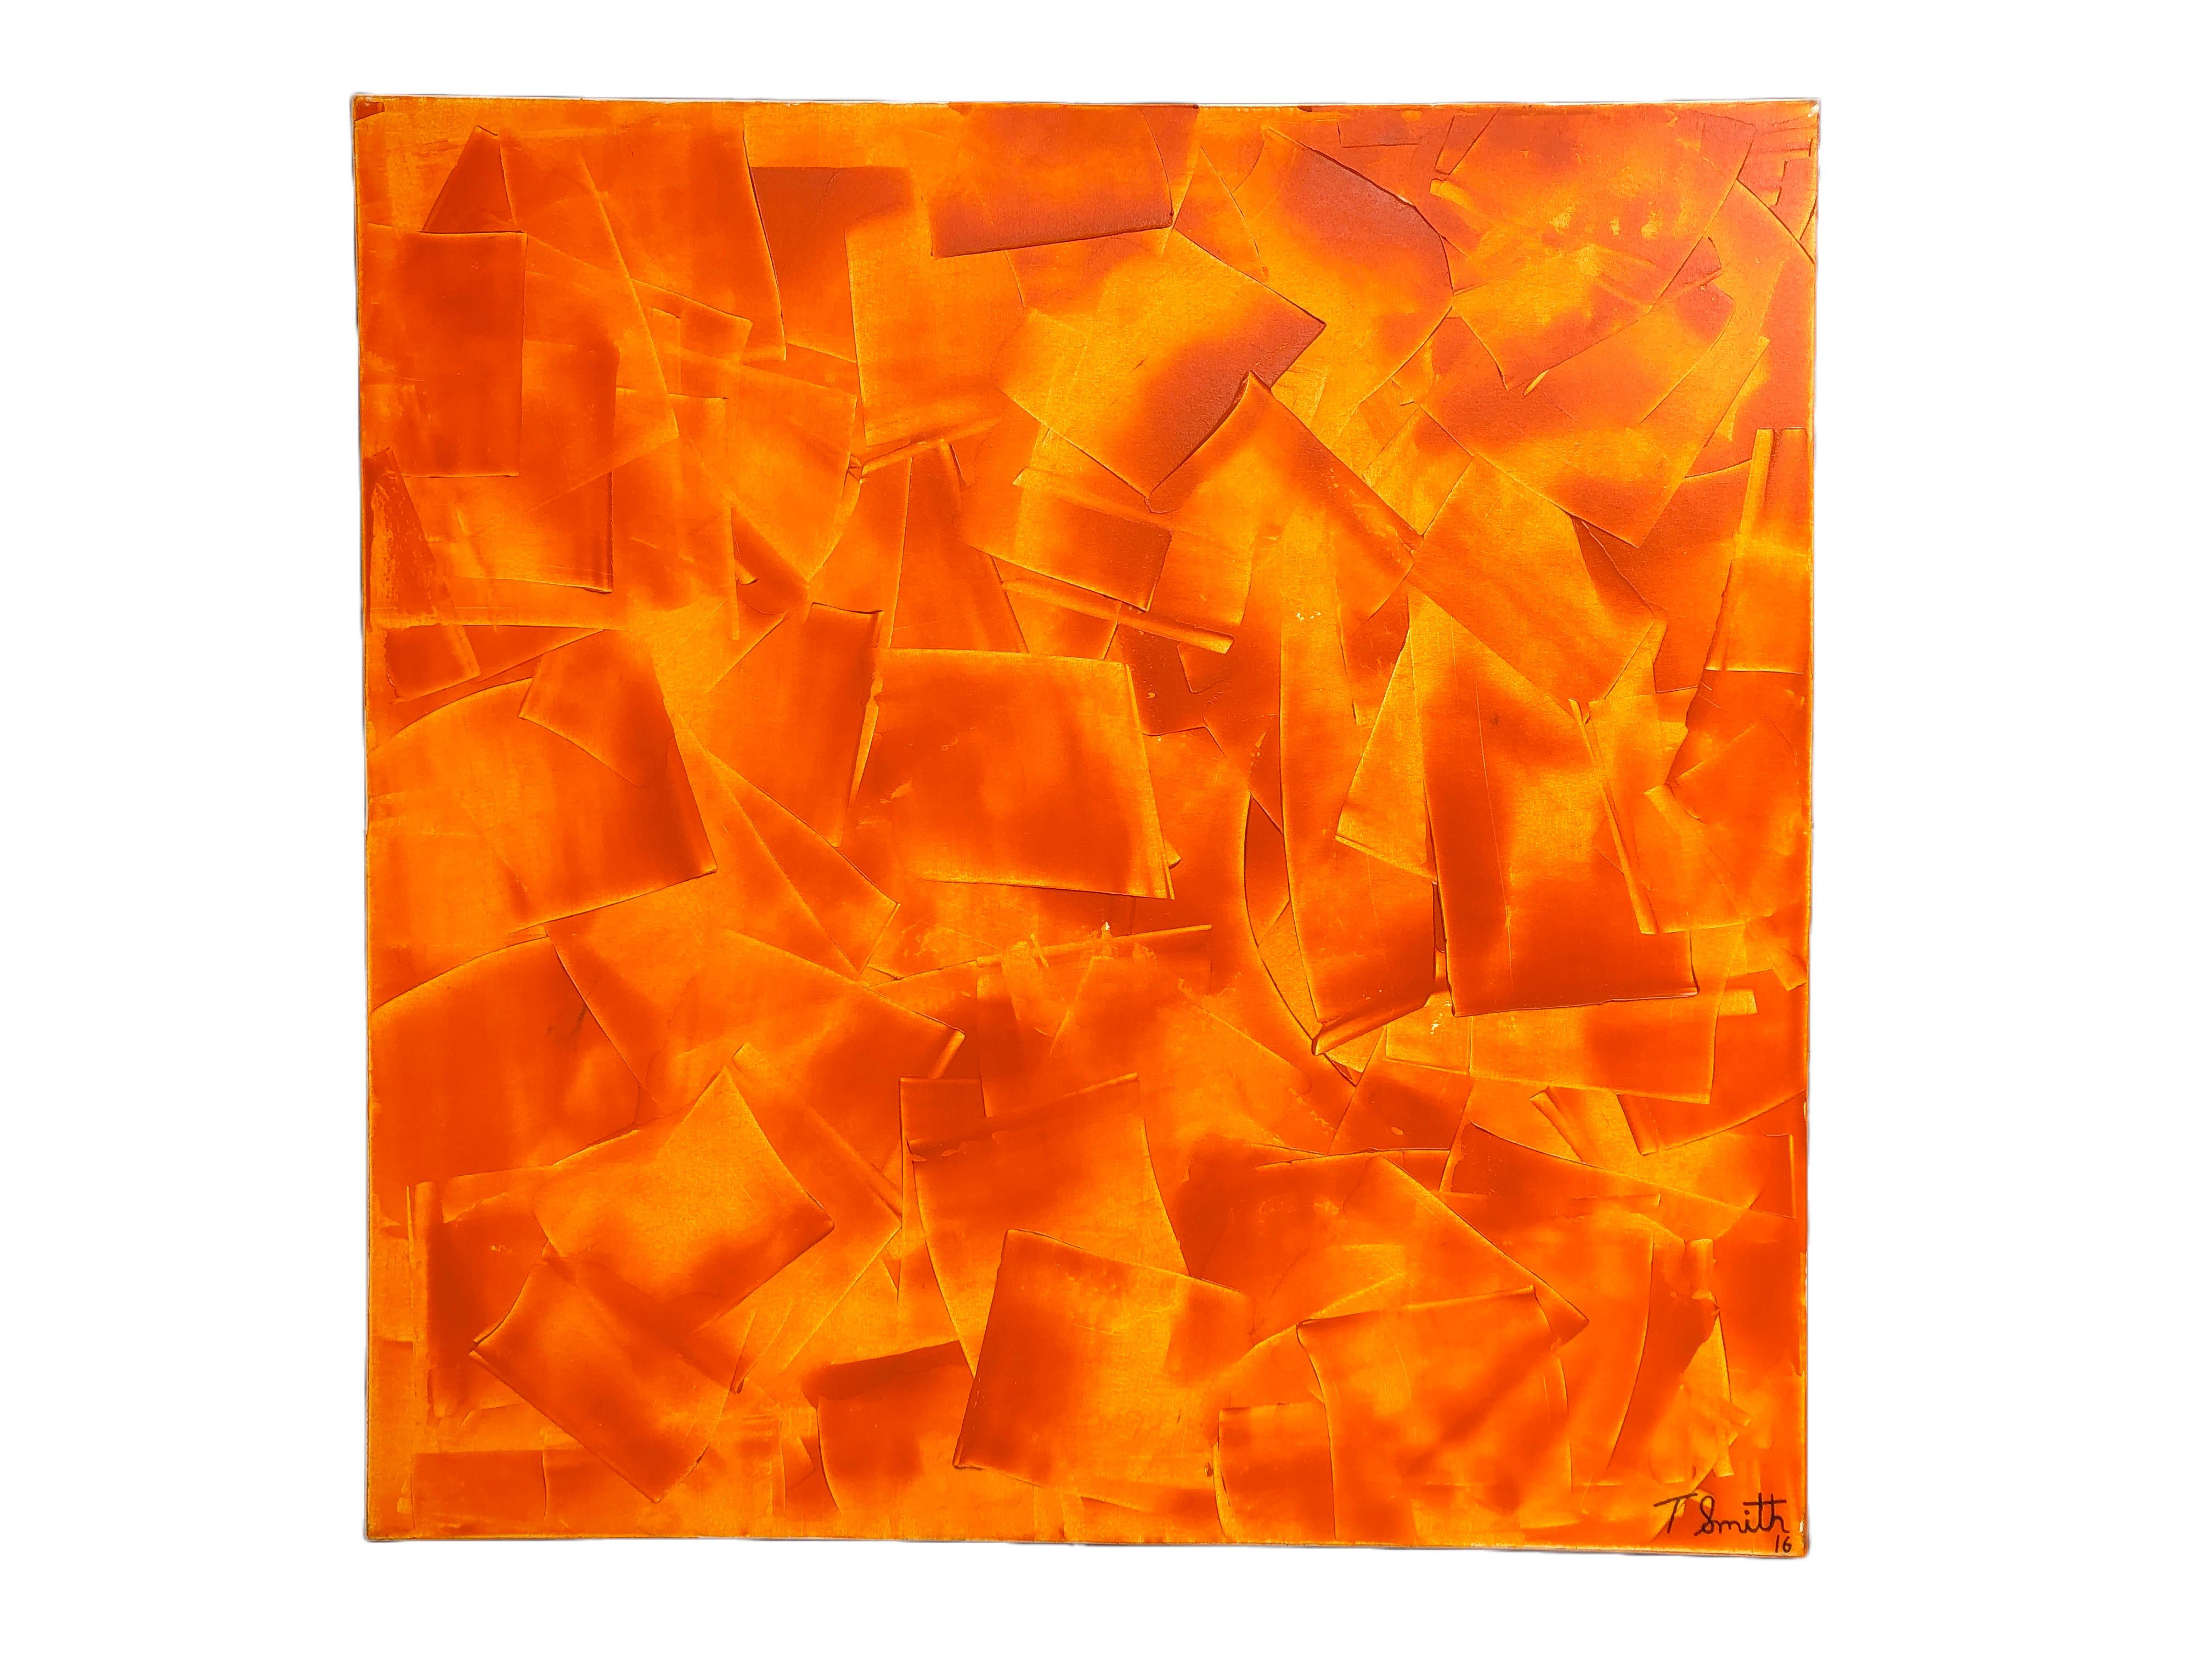 Burnt By Troy Smith Fine Art Abstract Art - Orange Abstract Painting by Troy Smith Studio